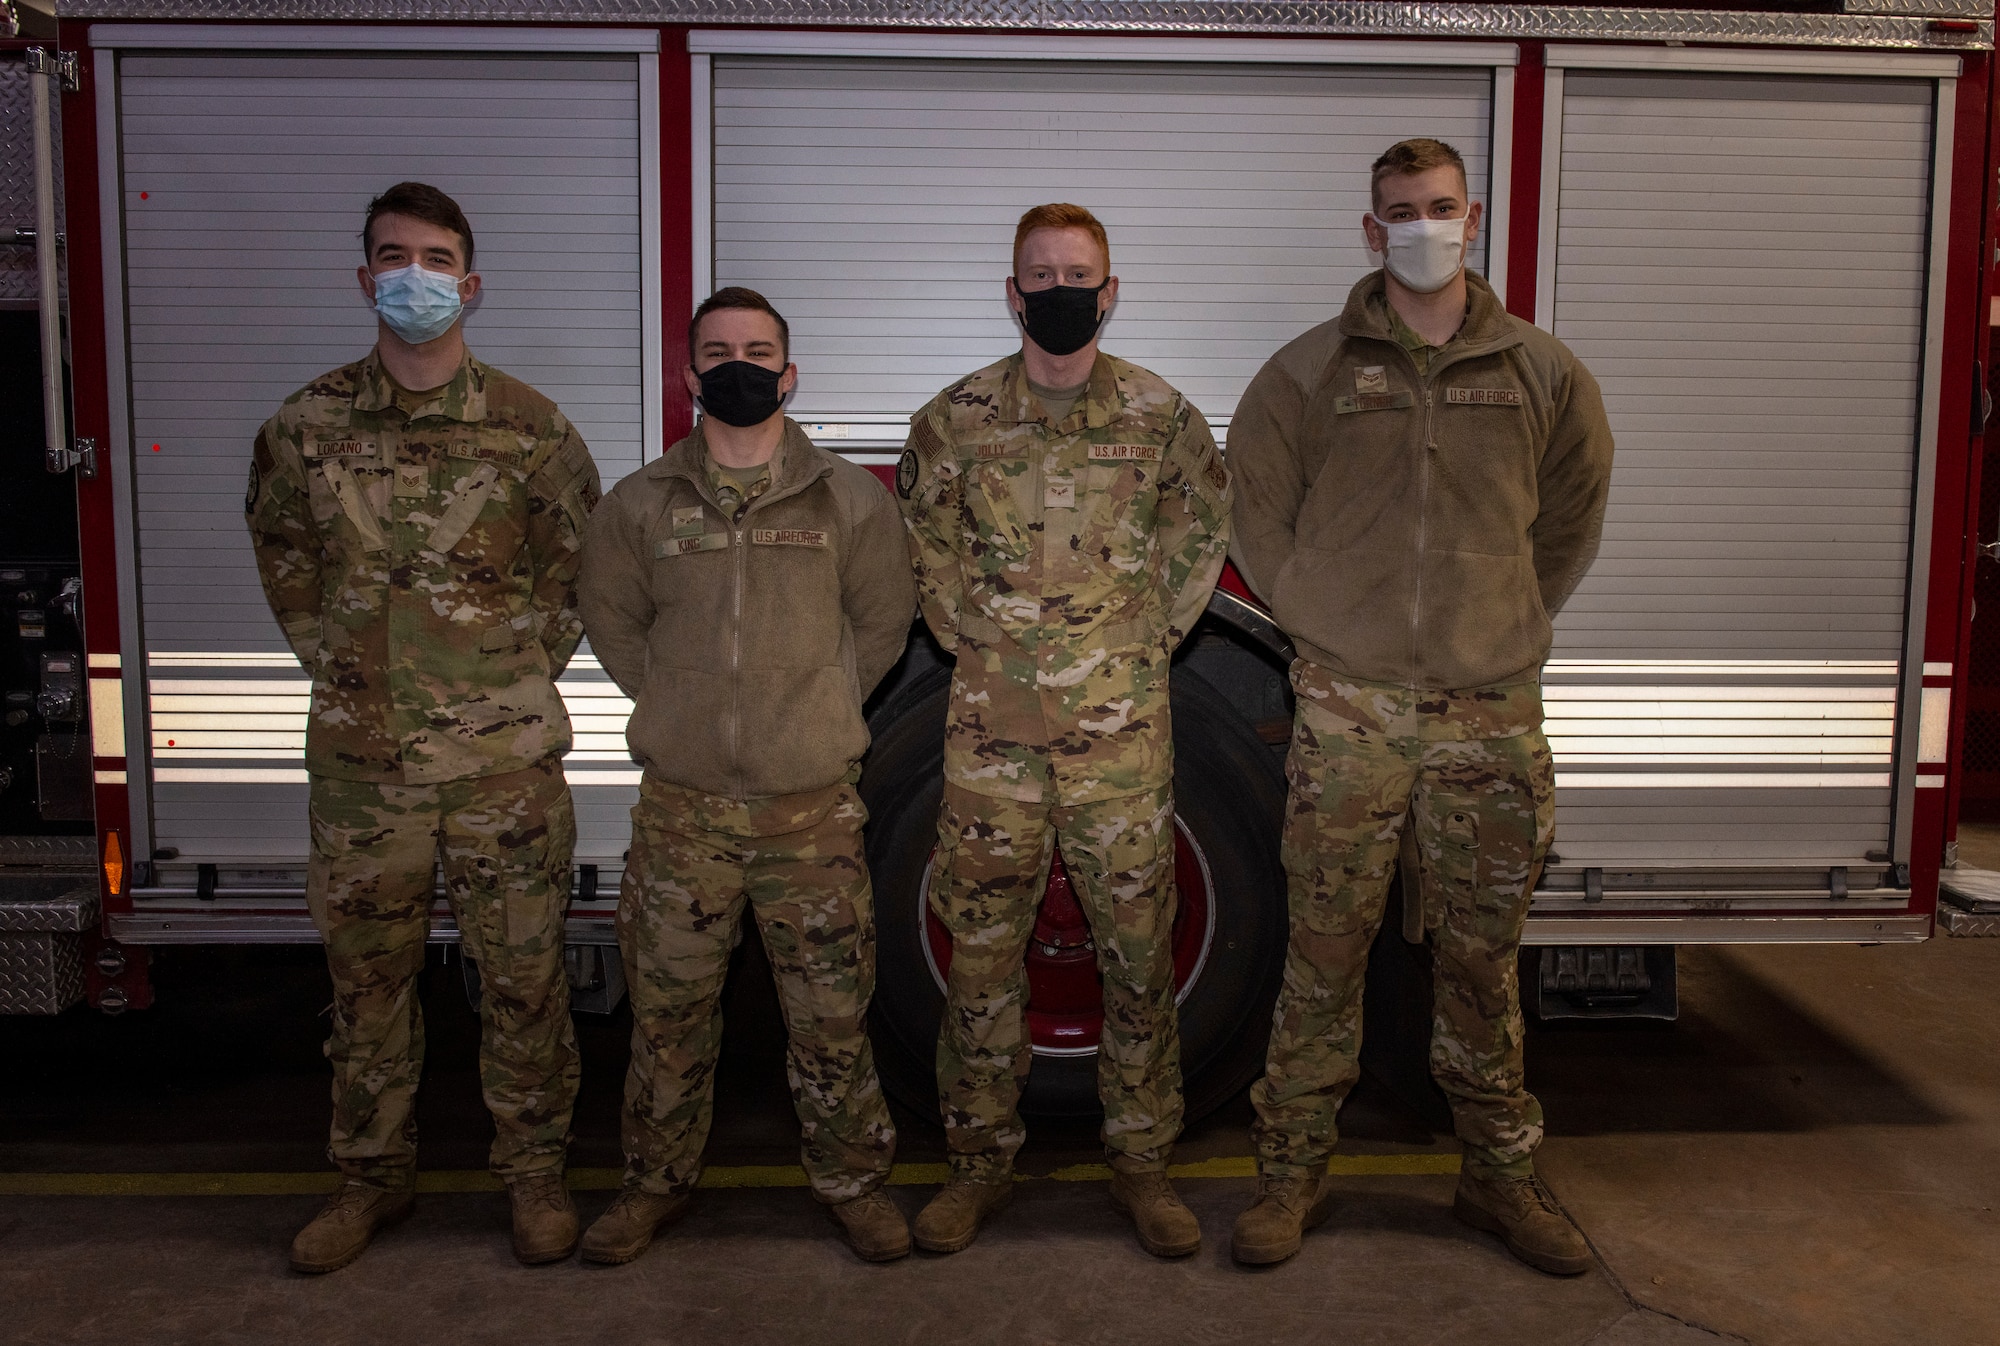 Staff Sgt. Charles Loicano, Airman 1st Class Matyas King, Airman 1st Class Austin Jolly and Airman 1st Class Joshua Turner from the 97th Civil Engineer Squadron Fire and Emergency Services Flight pose at Altus Air Force Base, Oklahoma, Jan. 17, 2022. The Airmen were awarded with life-saving certificates signed by the Air Force fire chief. (U.S. Air Force photo by Airman 1st Class Miyah Gray)